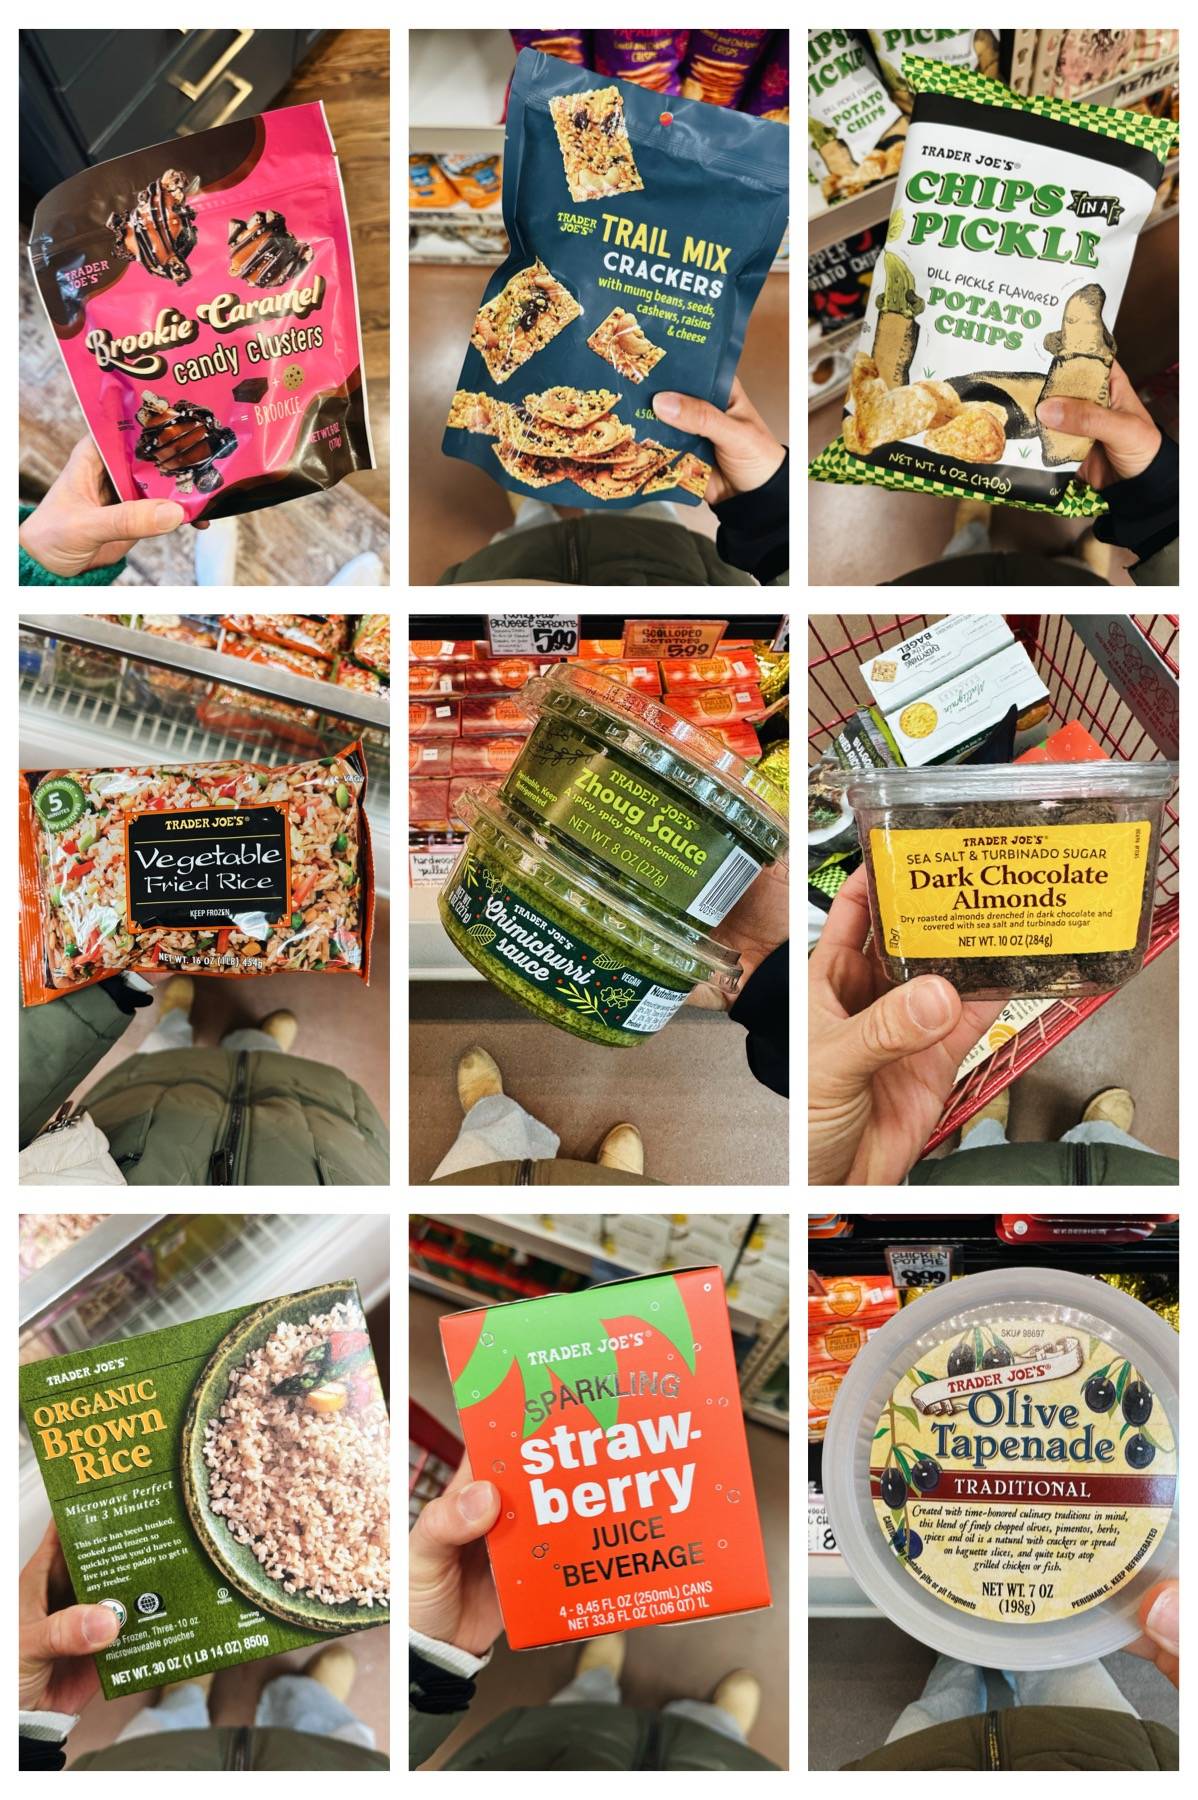 Trader Joe's products in a grid of images.